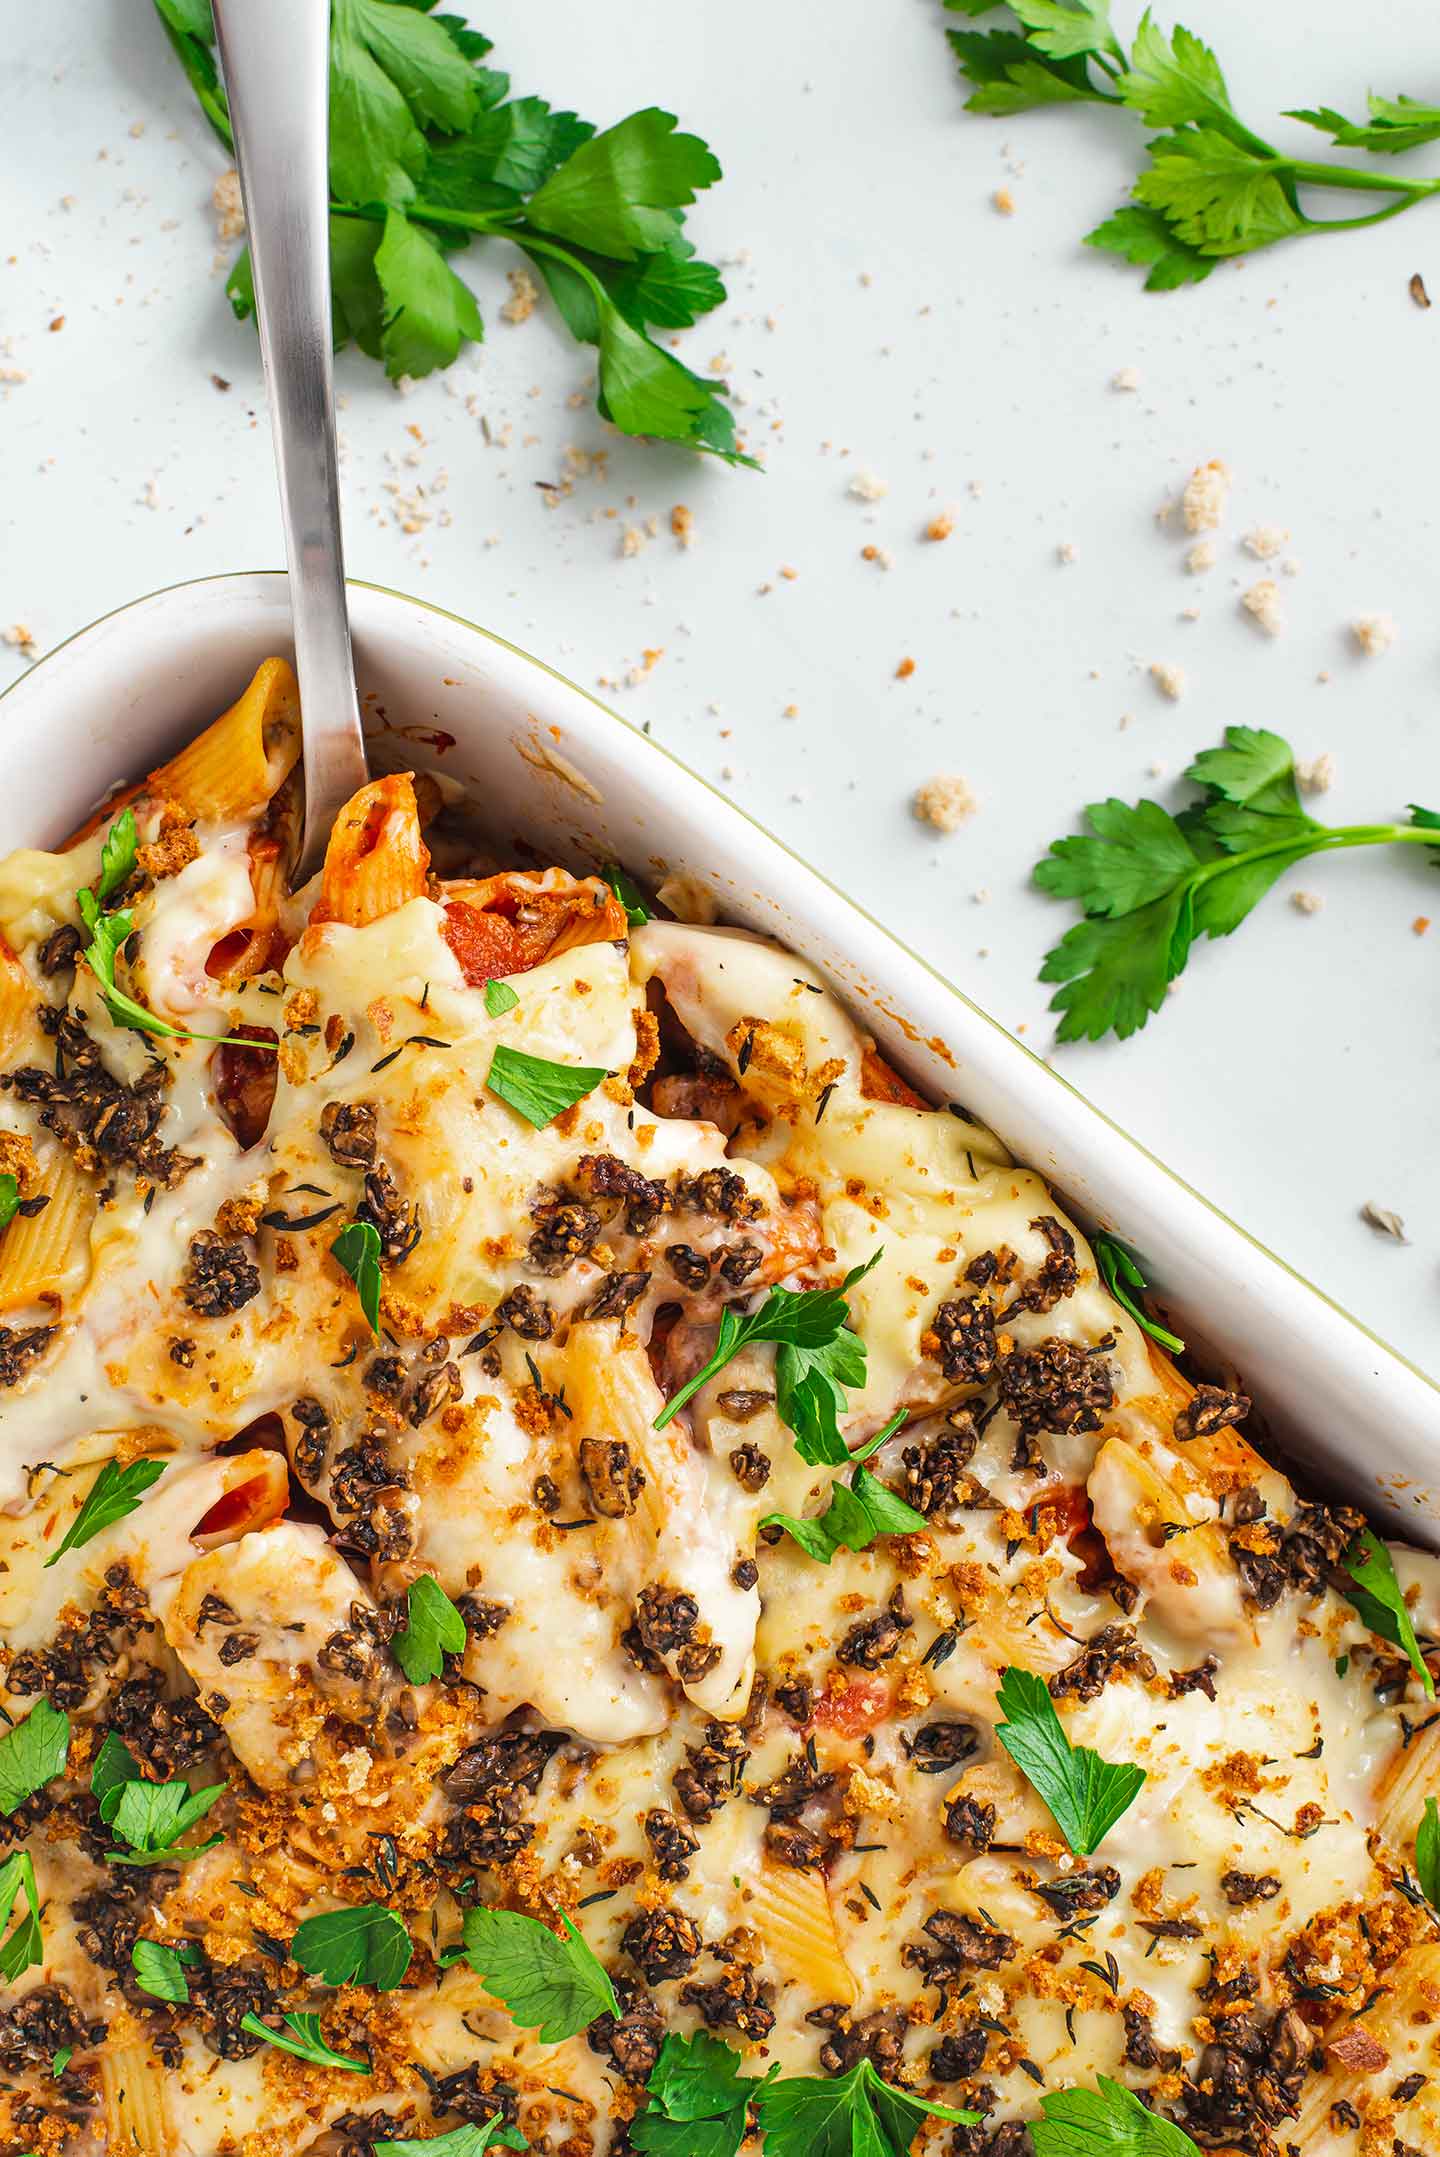 Top down view of wallet friendly baked ziti in a casserole dish with a spoon. Creamy bechamel, meaty mushrooms, parsley, and breadcrumbs garnish the top.